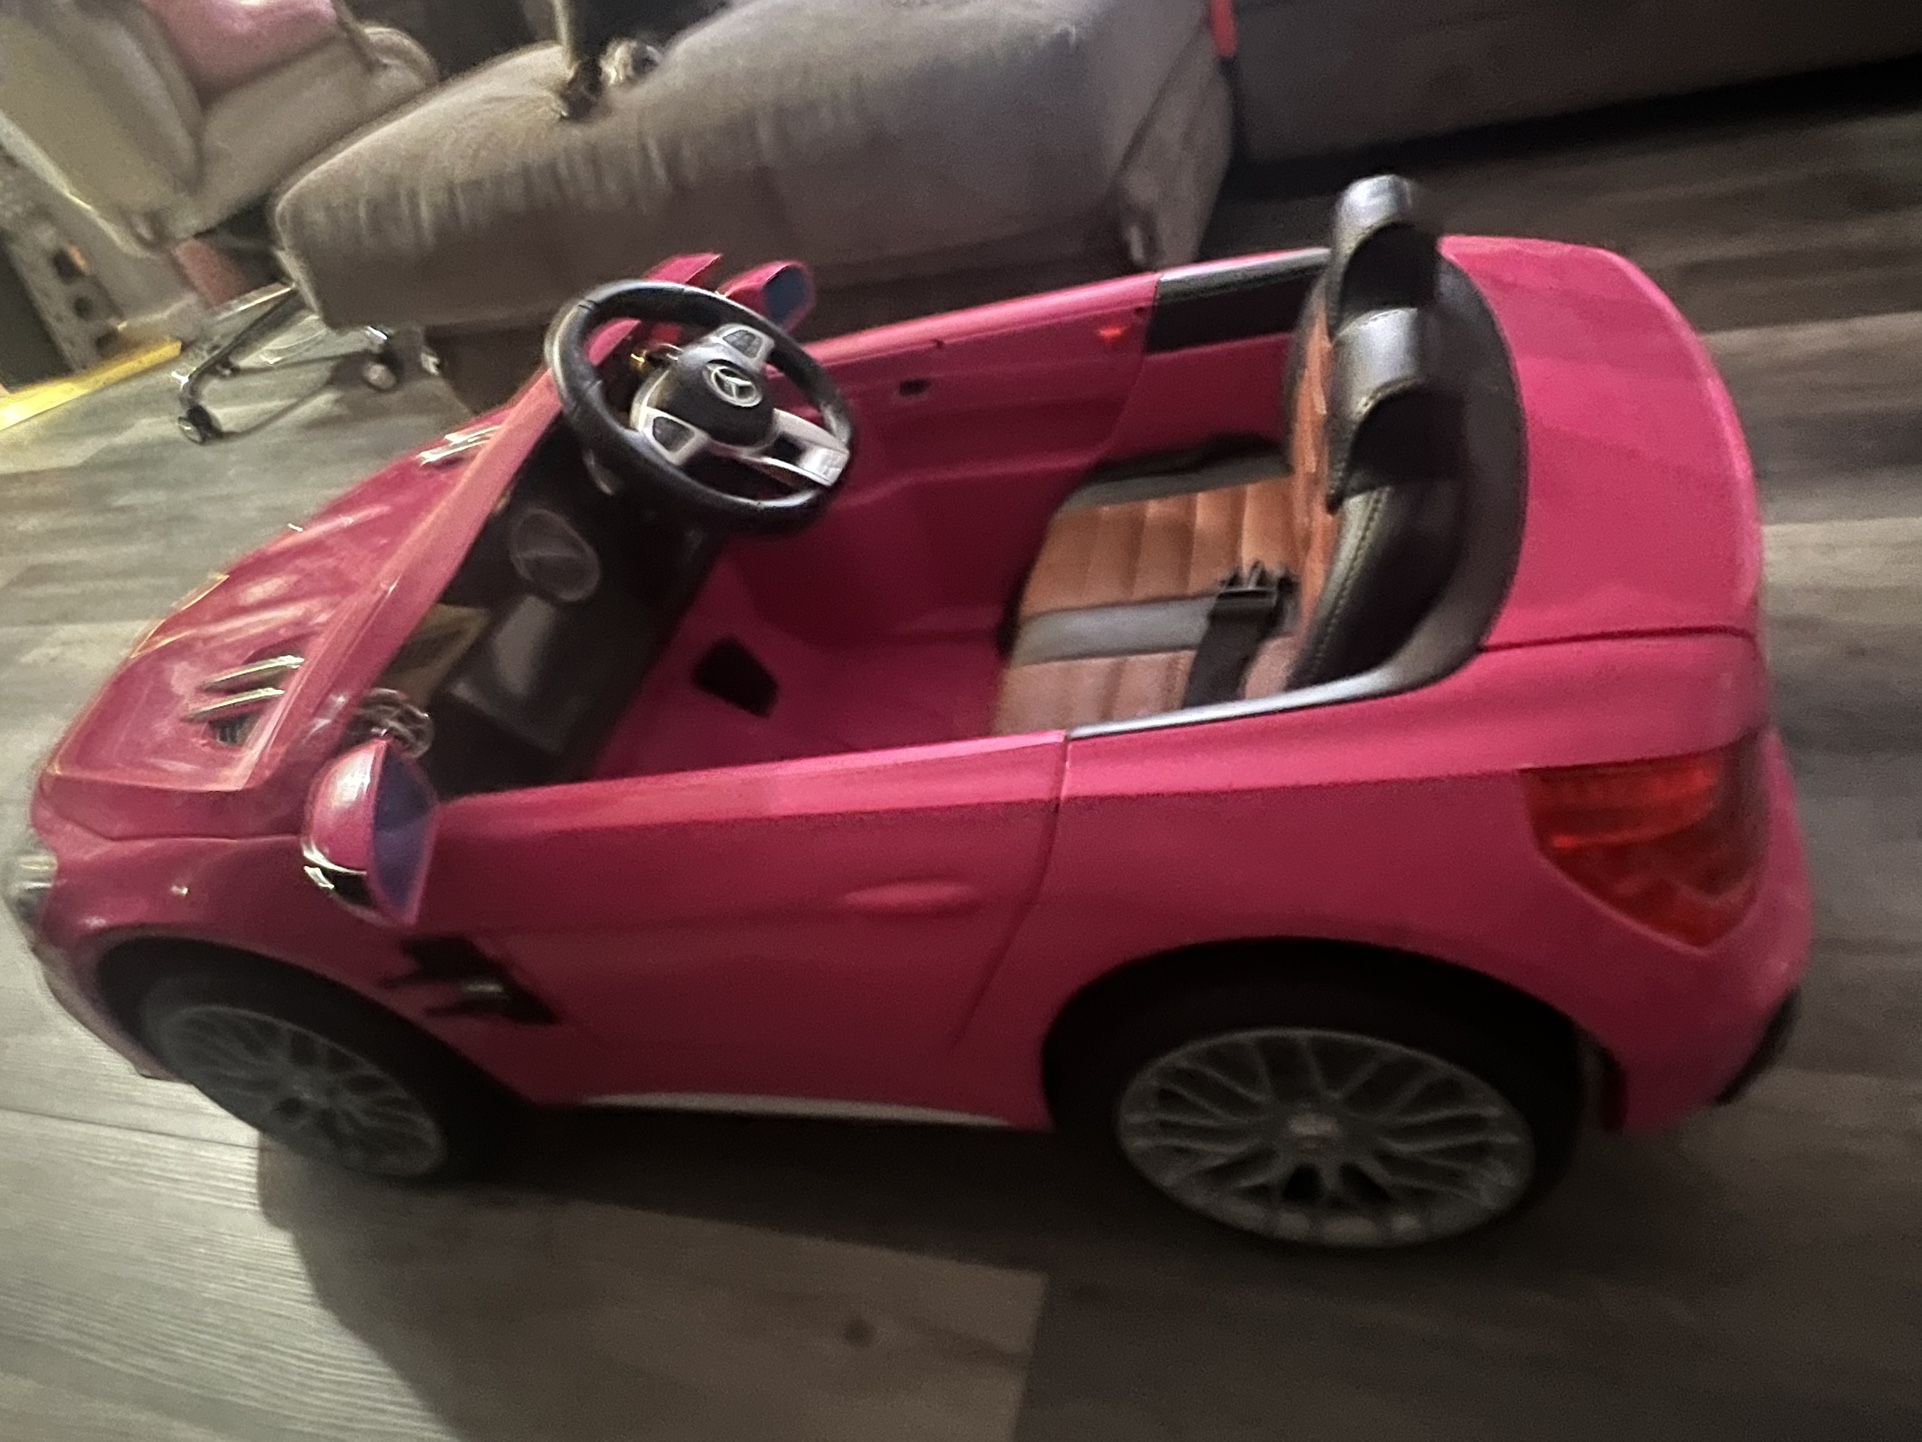 Mercedes-Benz SL65 12V Powered Ride on Car for Kids with Remote Control